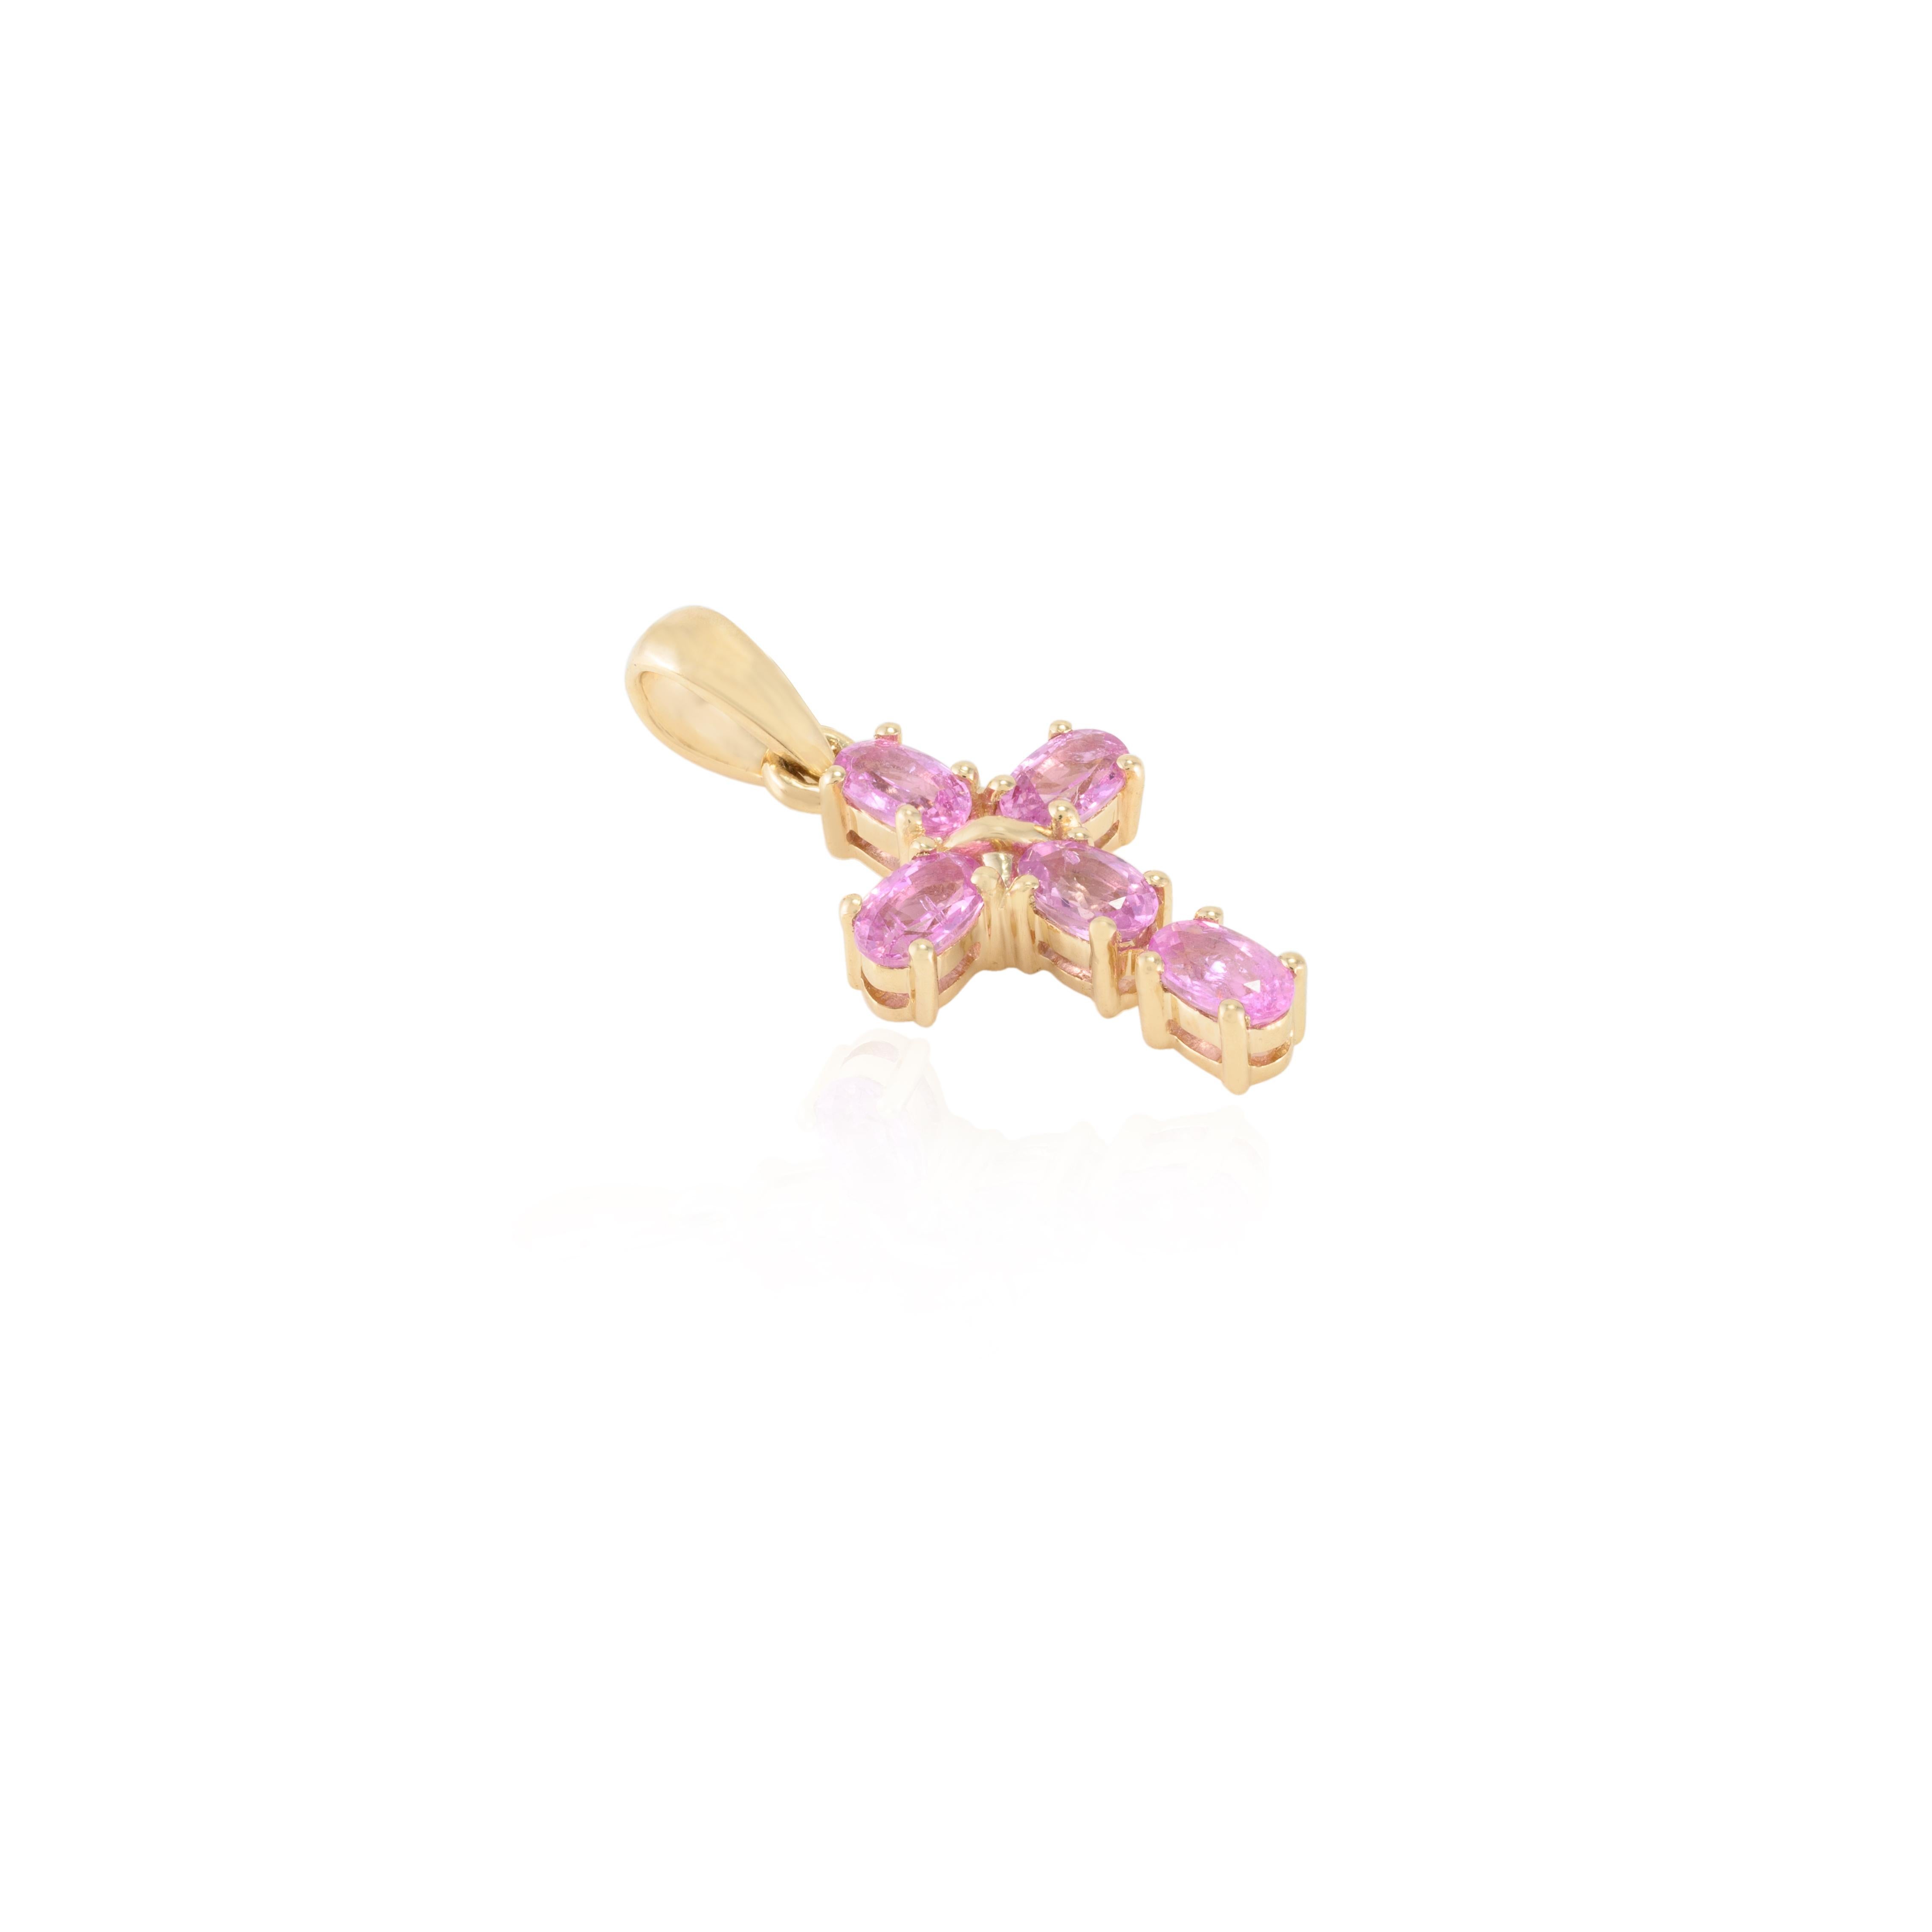 Natural Pink Sapphire Cross Pendant in 14K Gold studded with oval cut pink sapphire. This stunning piece of jewelry instantly elevates a casual look or dressy outfit. 
Sapphire stimulates concentration and reduces stress.
Designed with oval cut pink